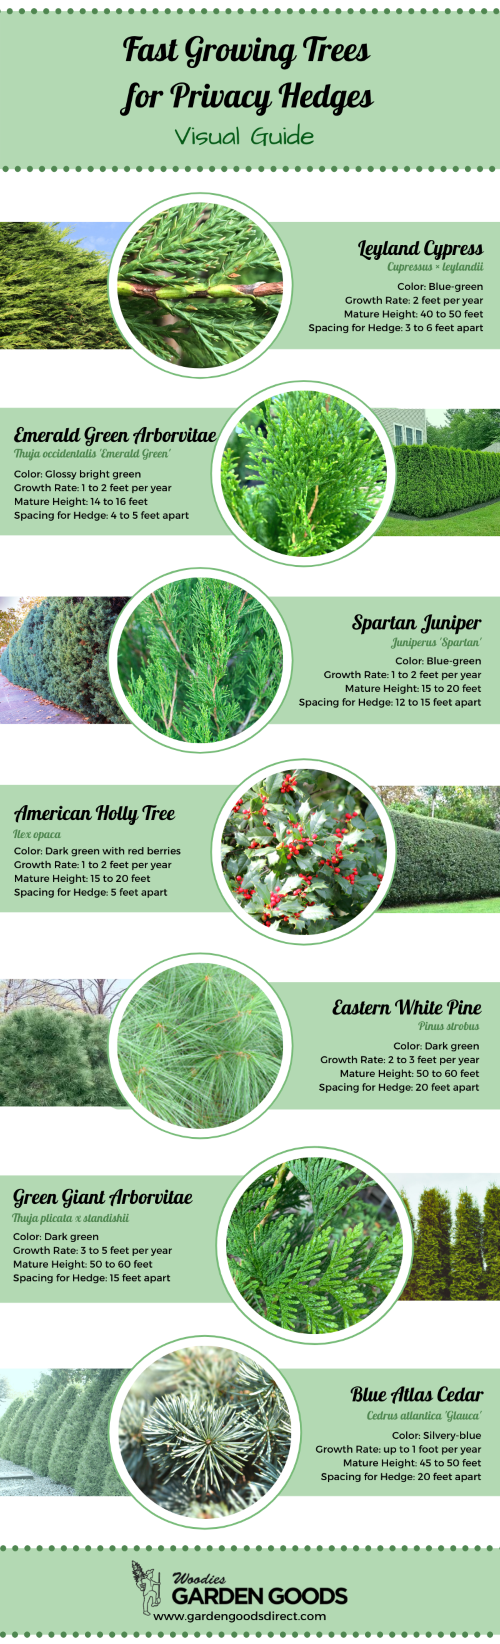 How to Plant Privacy Trees - Plant Guide | Garden Goods Direct